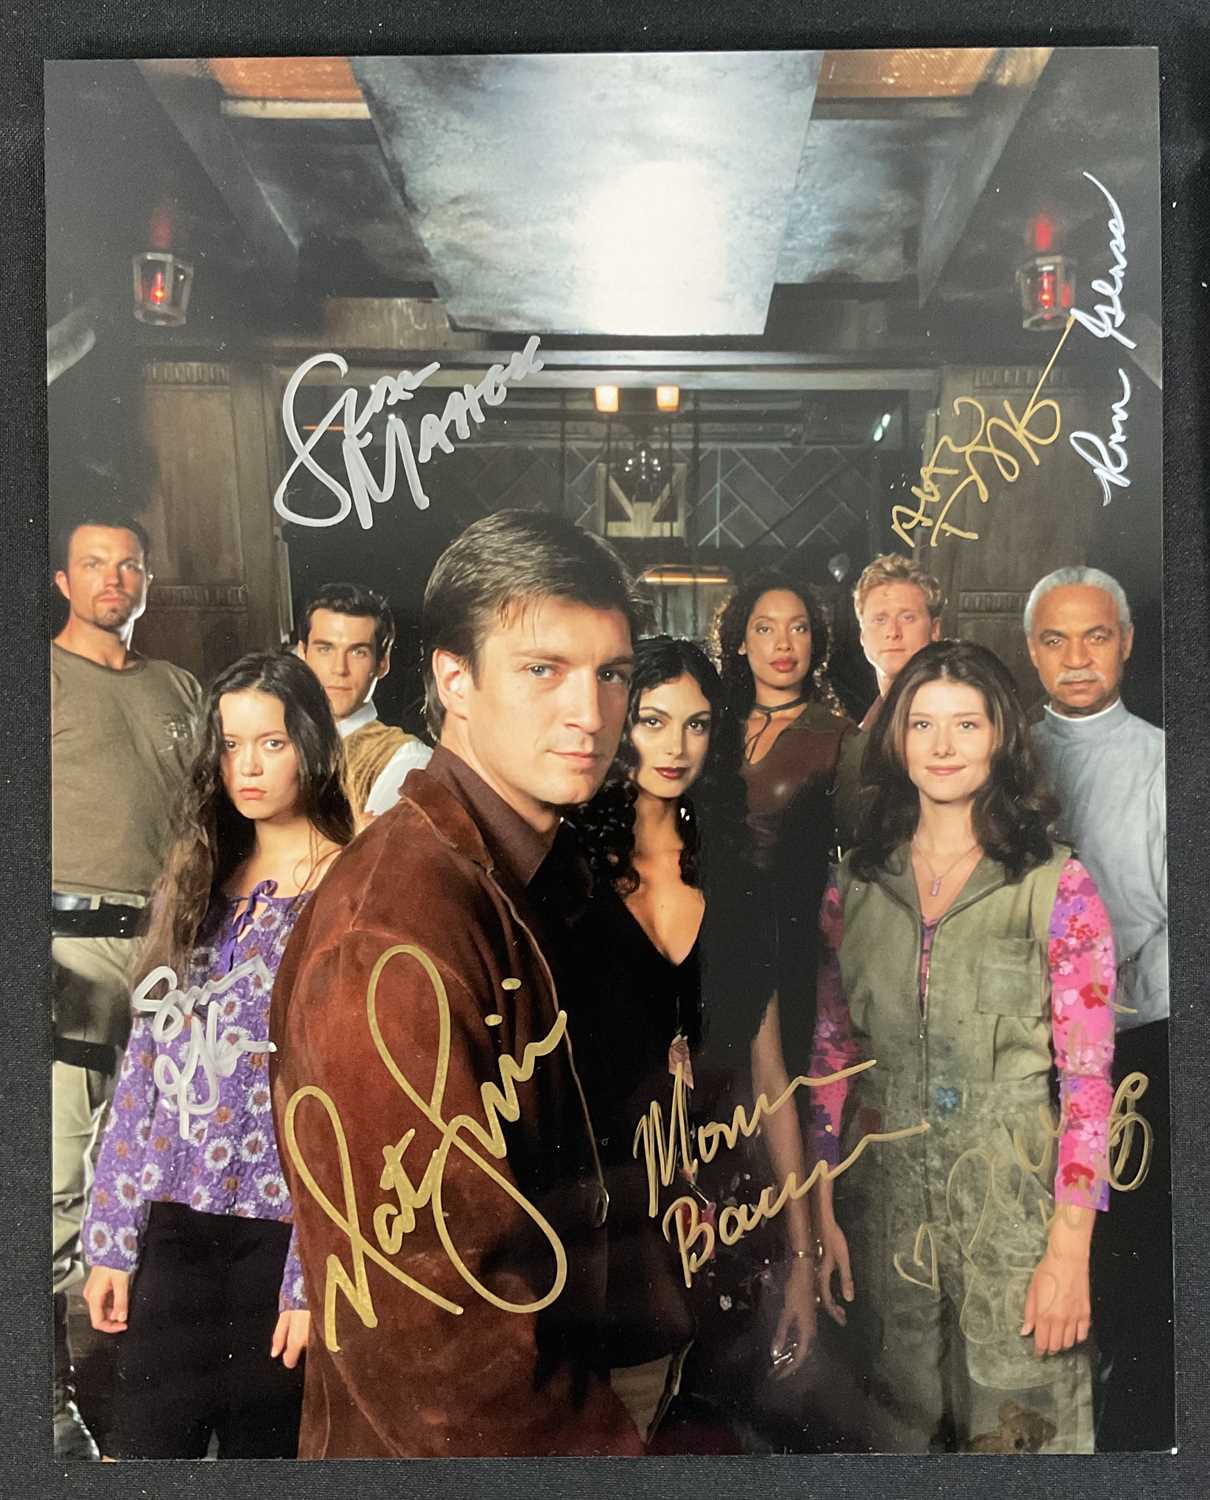 A group of SERENITY / FIREFLY autographs and promotional material including A cast photo signed by - Image 3 of 3